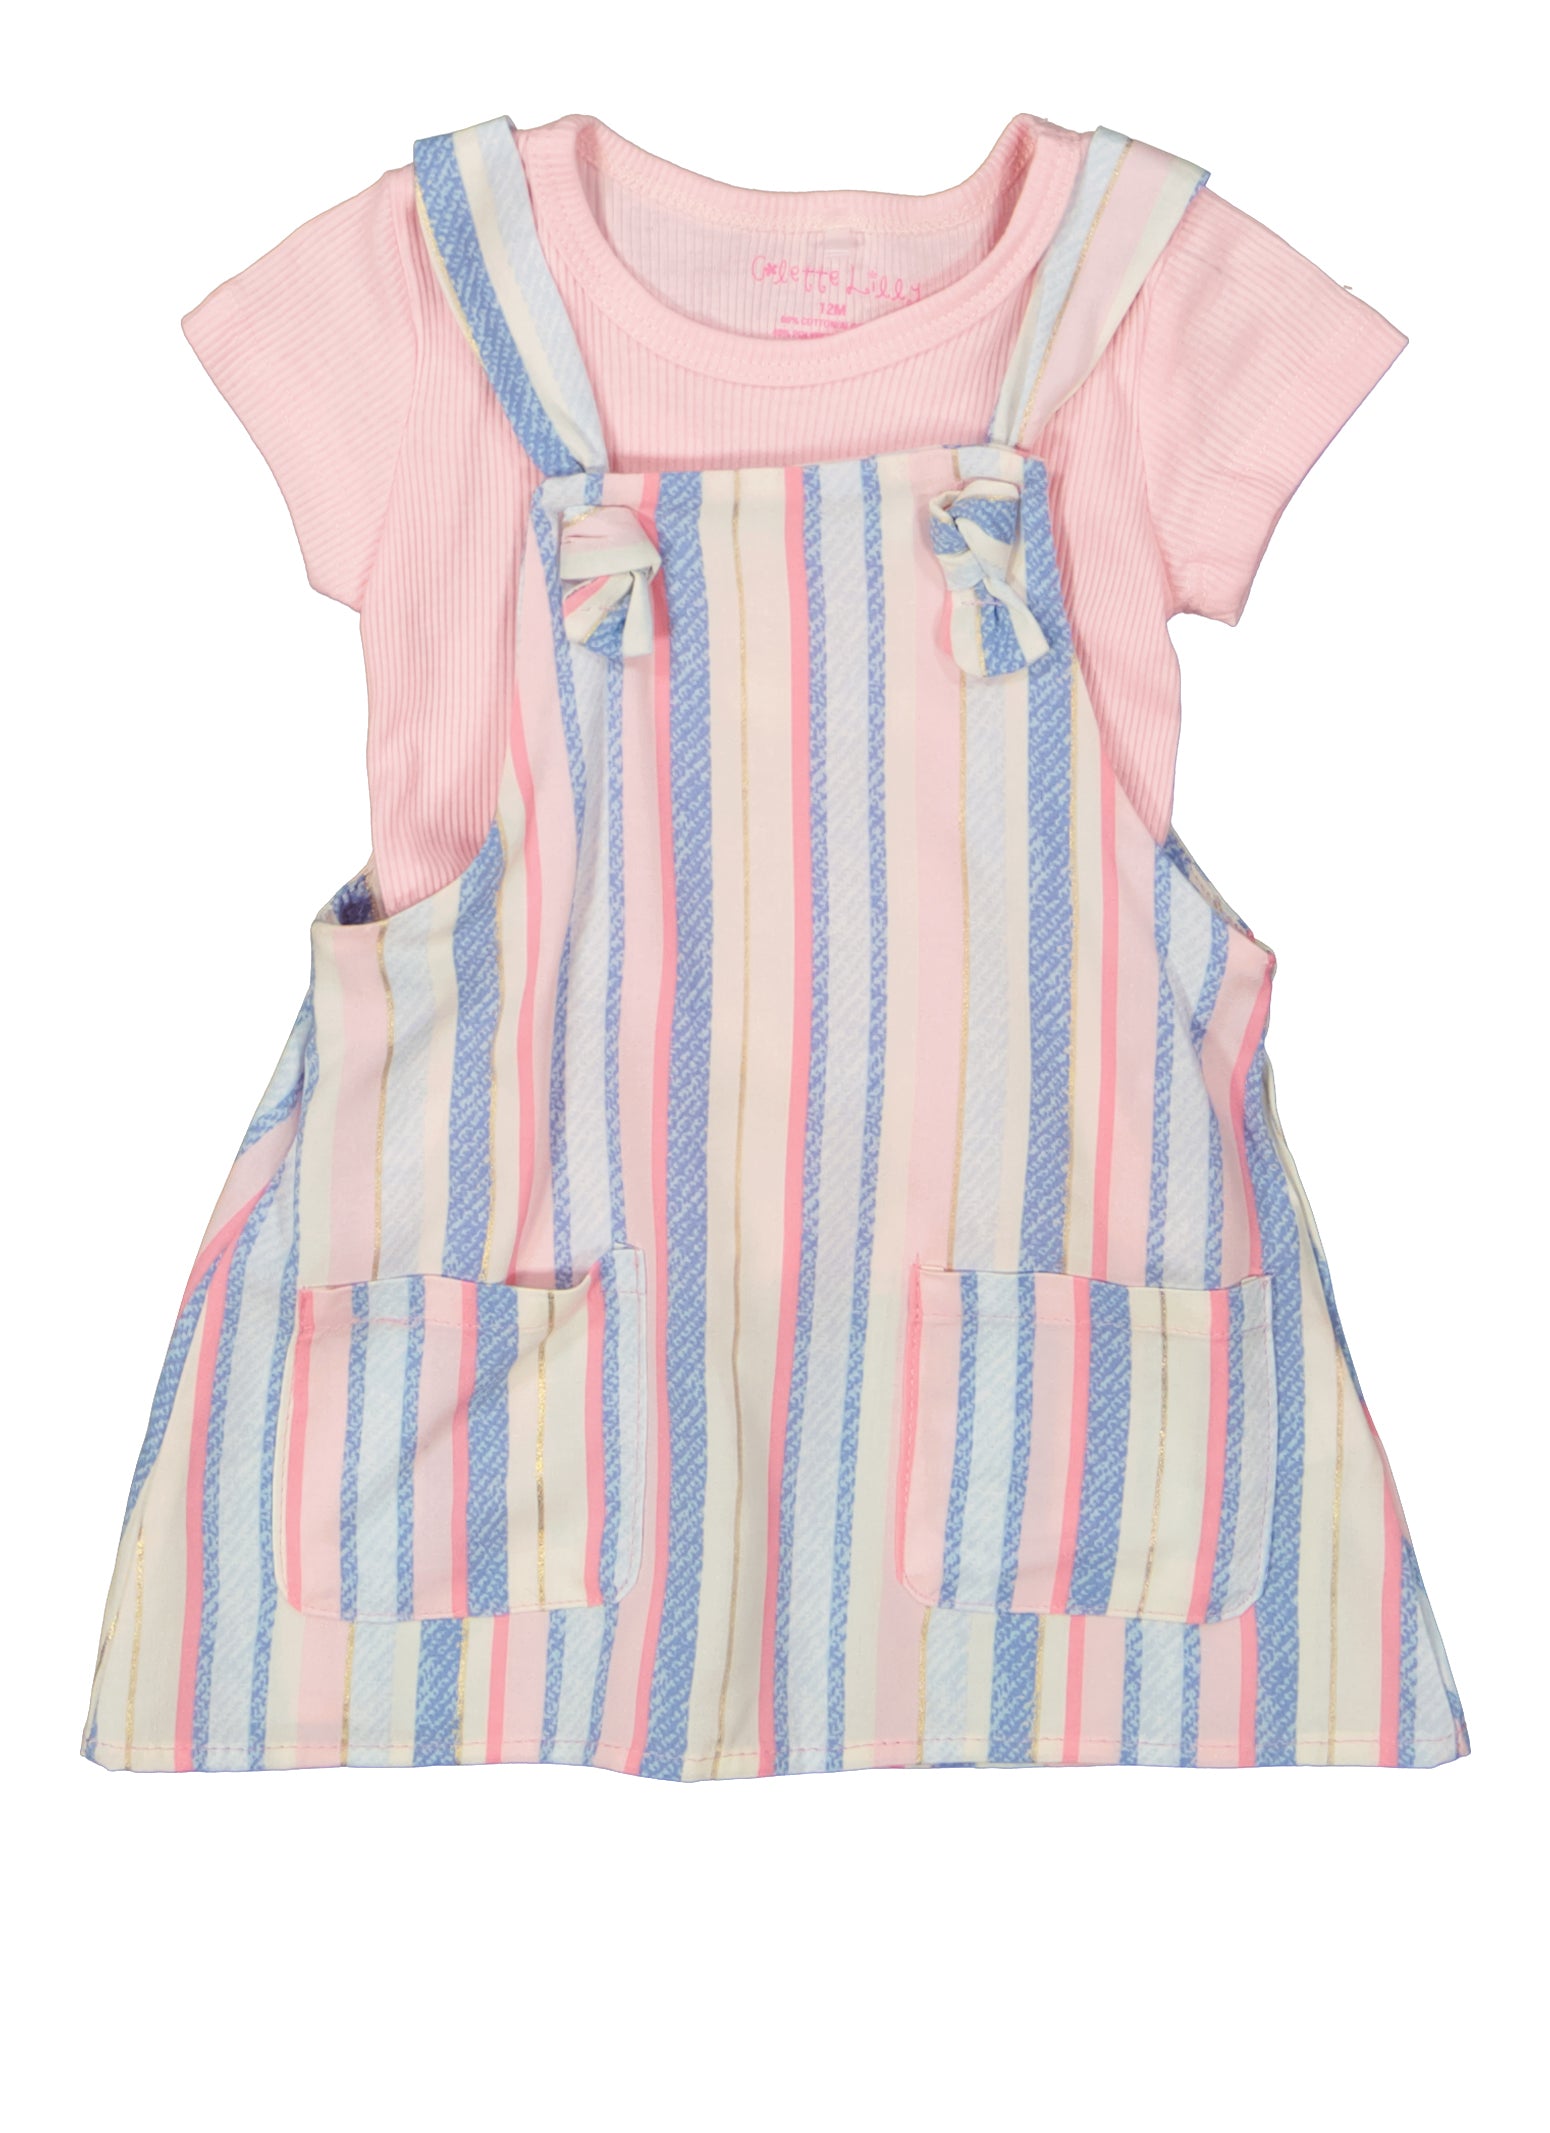 Girls Some Bunny Loves You Top and Denim Overall Dress Set - Mia Belle Girls